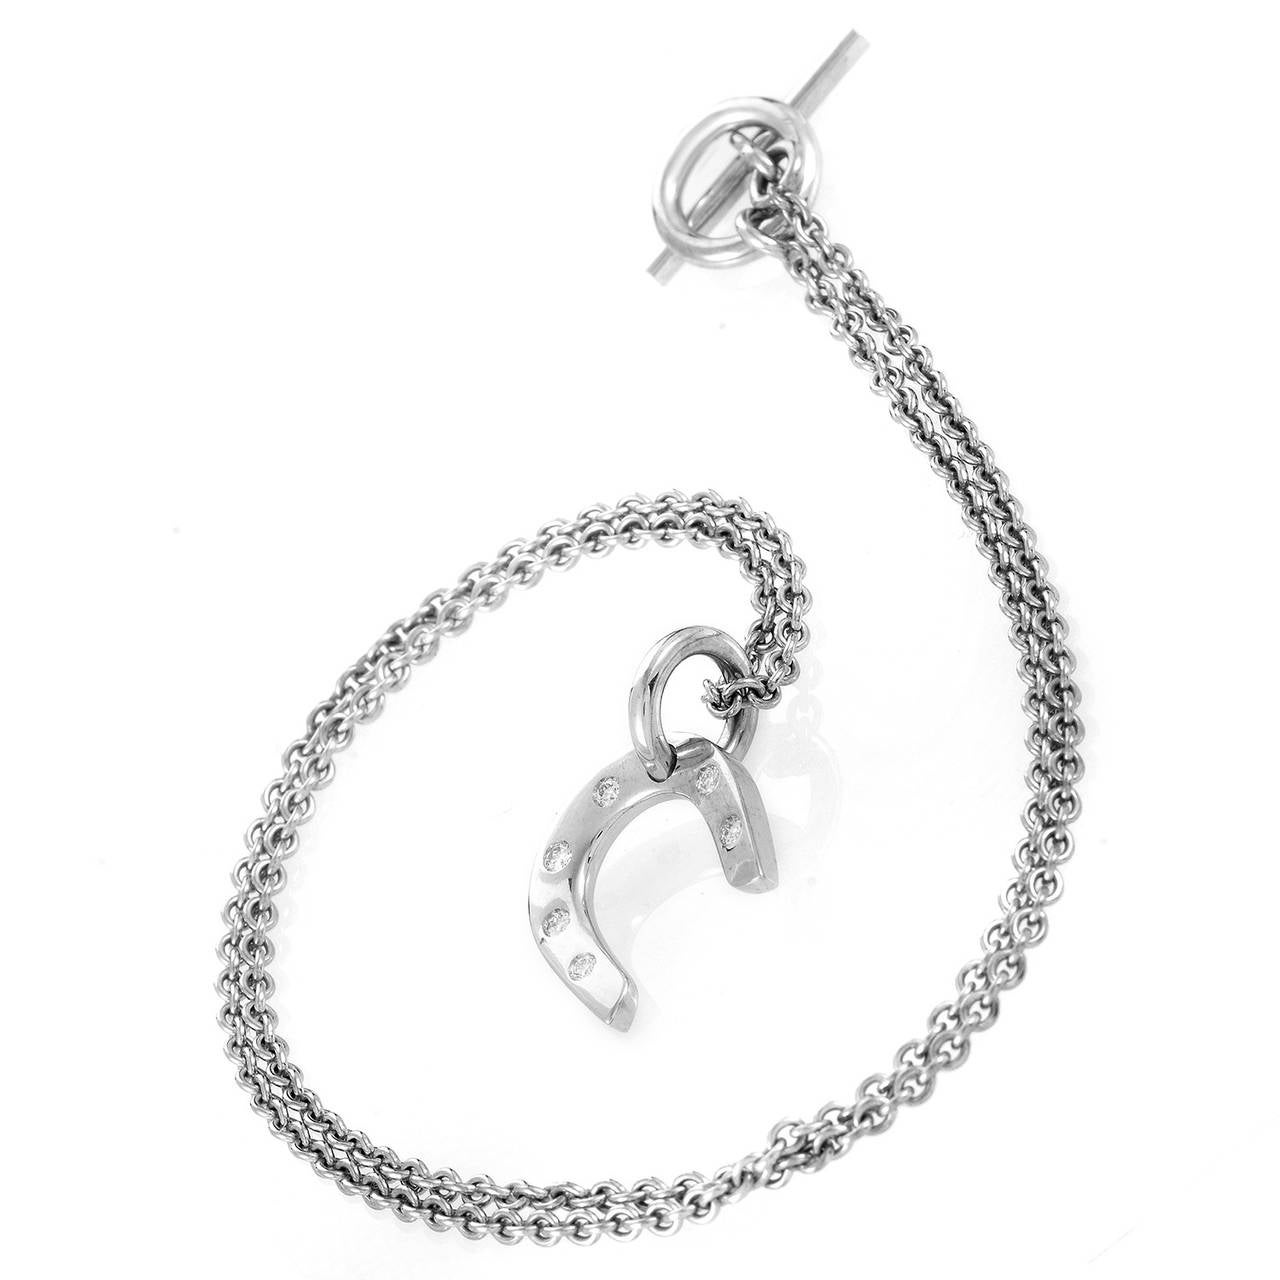 Made of shimmering 18K white gold, this elegant necklace from Hermes is comprised of a classic, subtle chain with a toggle clasp and a symbolic pendant in the form of a horseshoe set with delicate diamonds.